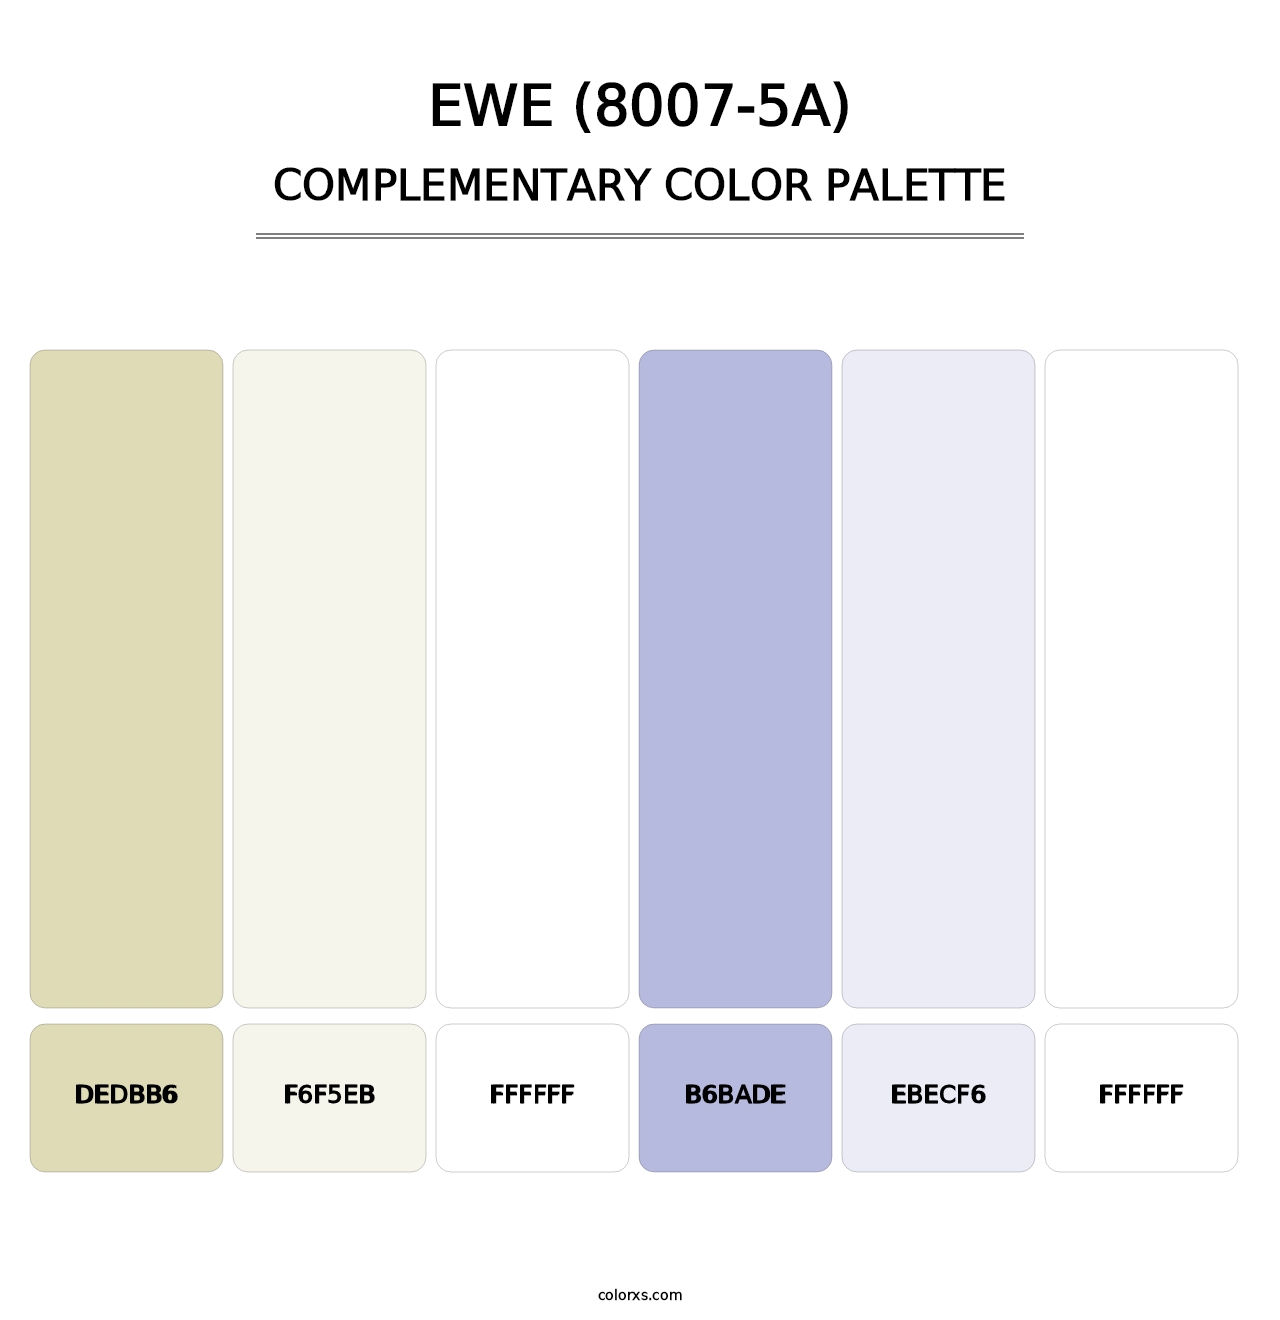 Ewe (8007-5A) - Complementary Color Palette